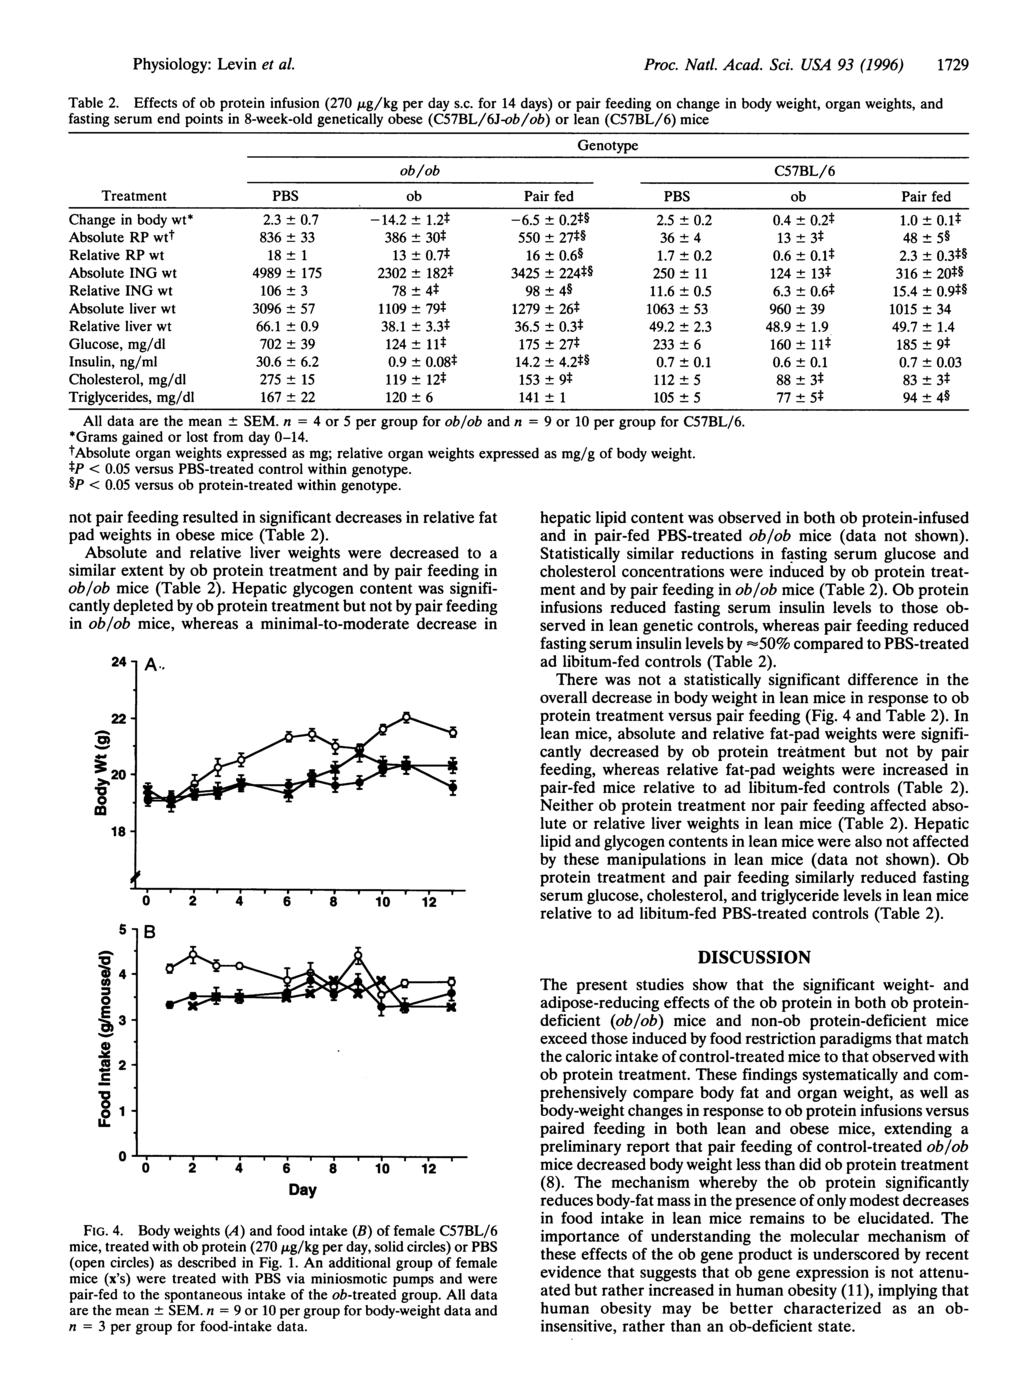 Proc. Natl. Acad. Sci. USA 93 (1996) 1729 Table 2. Effects of ob protein infusion (27 jig/kg per day s.c. for 14 days) or pair feeding on change in body weight, organ weights, and fasting serum end